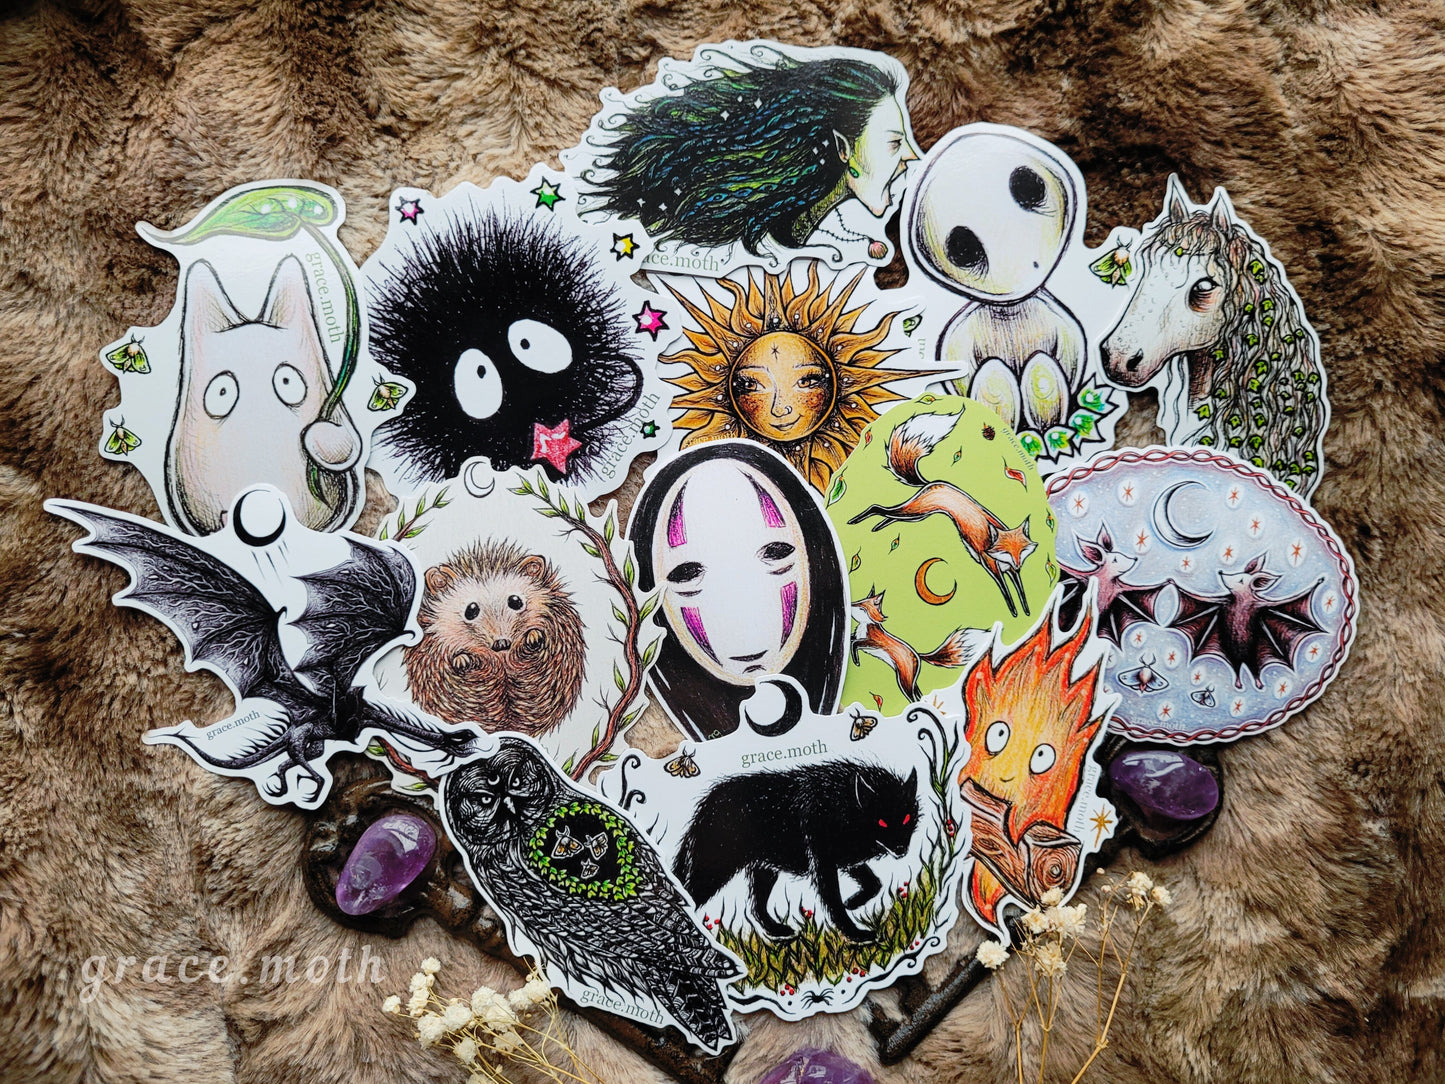 Soot Sprite spirit - Vinyl Sticker 10cm - Japanese Anime inspired art - Witchy - Gothic - Illustrated by Grace moth